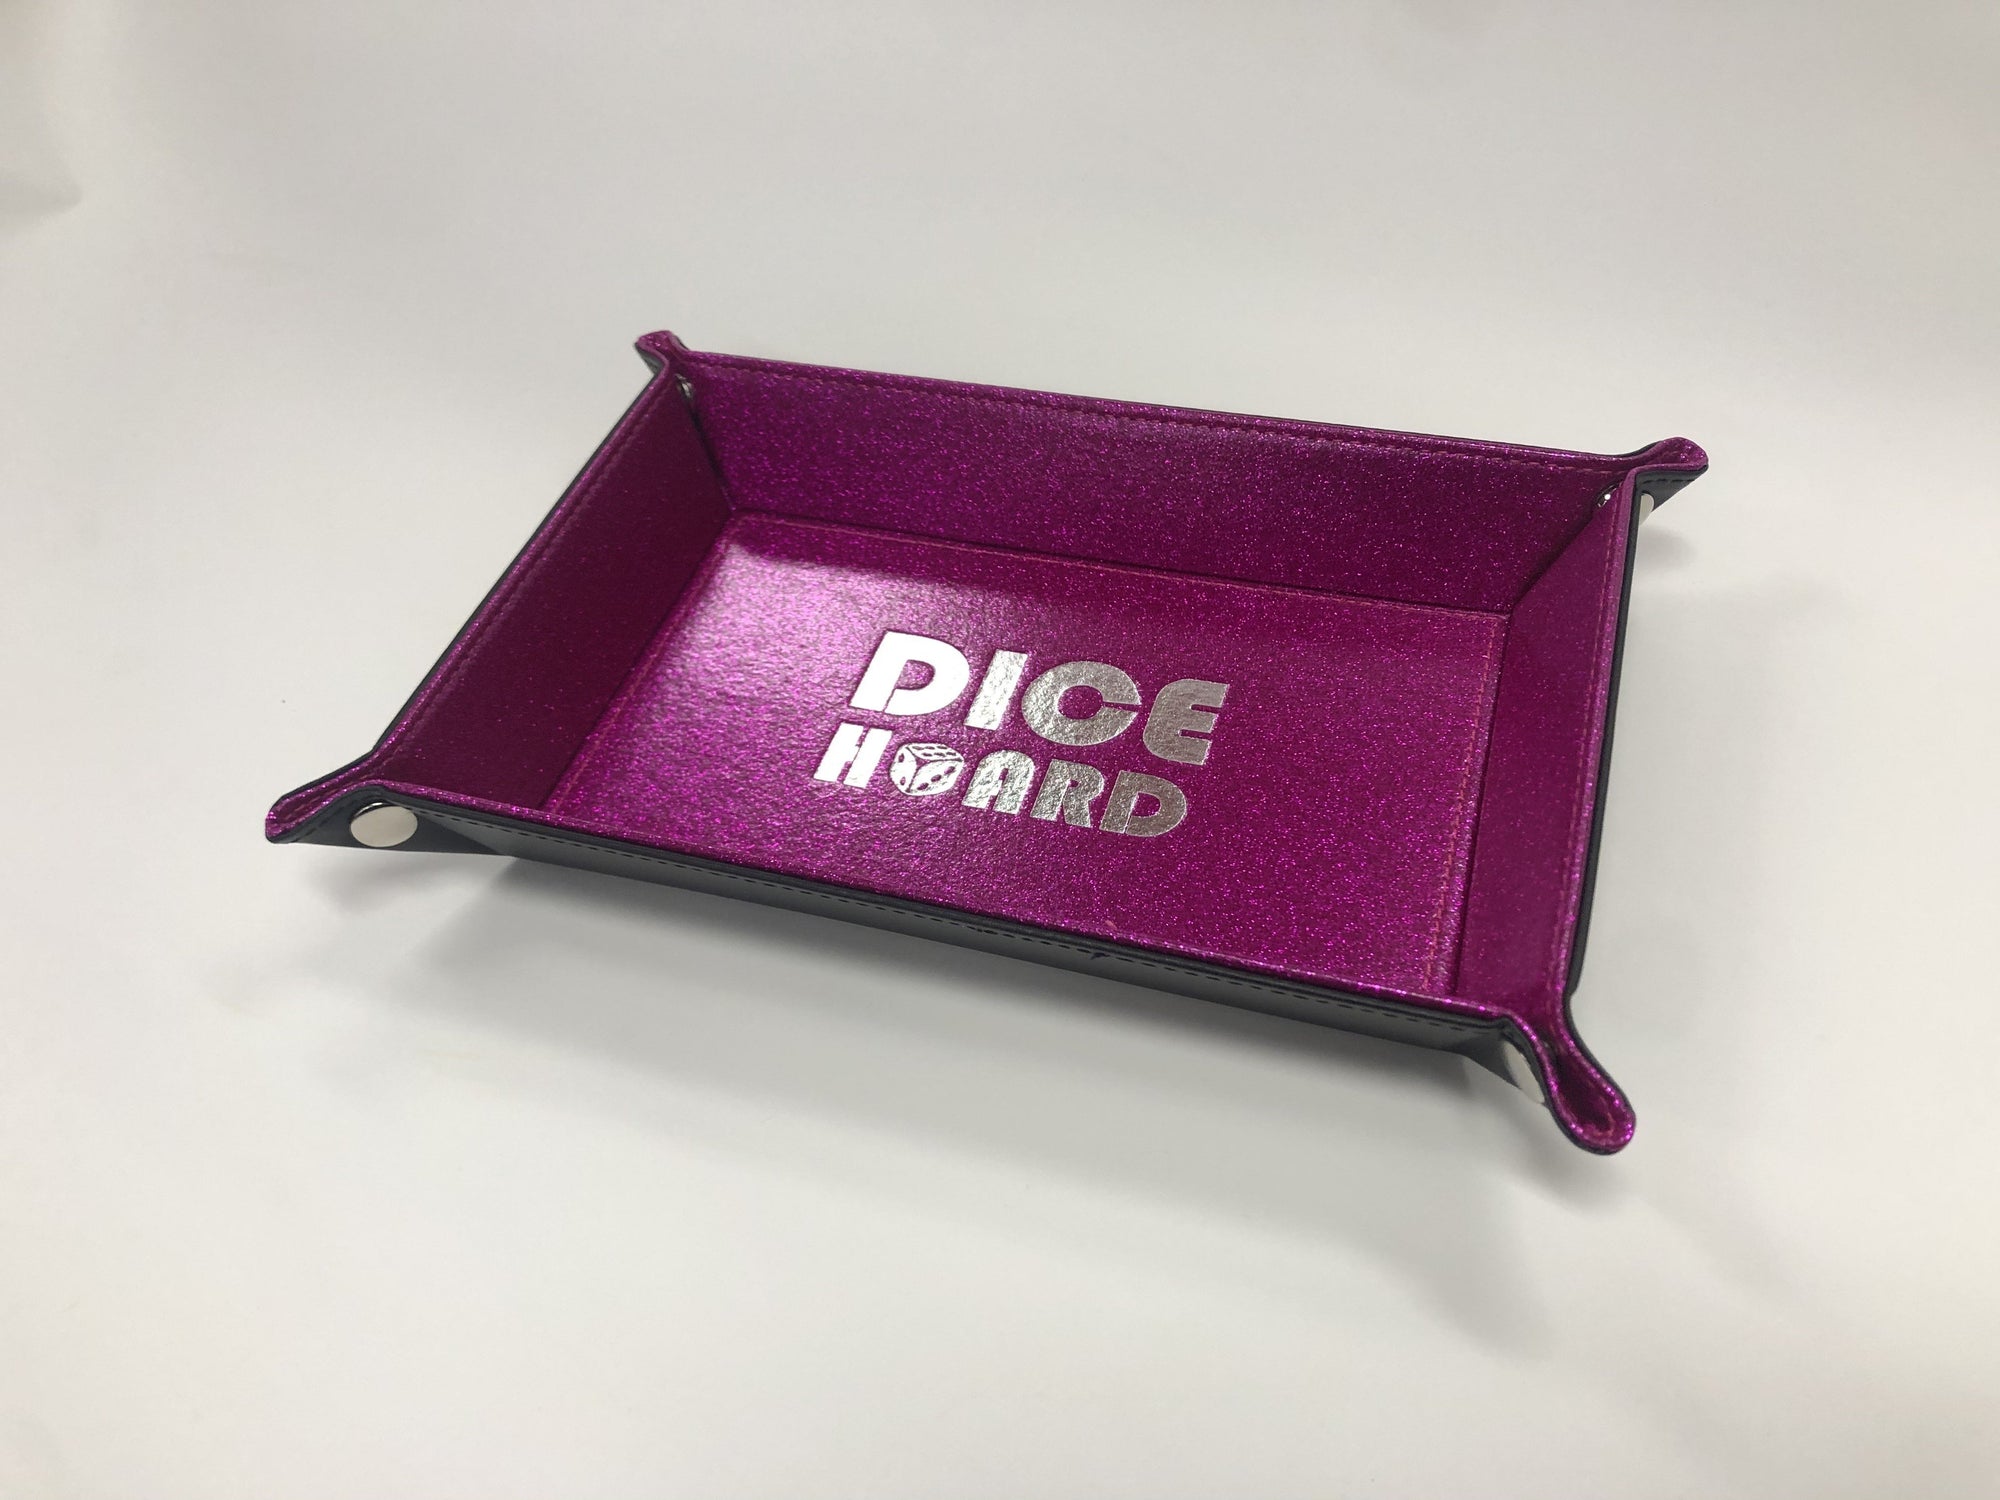 Dice Hoard Dice Tray Glitter Rose Red - Good Games